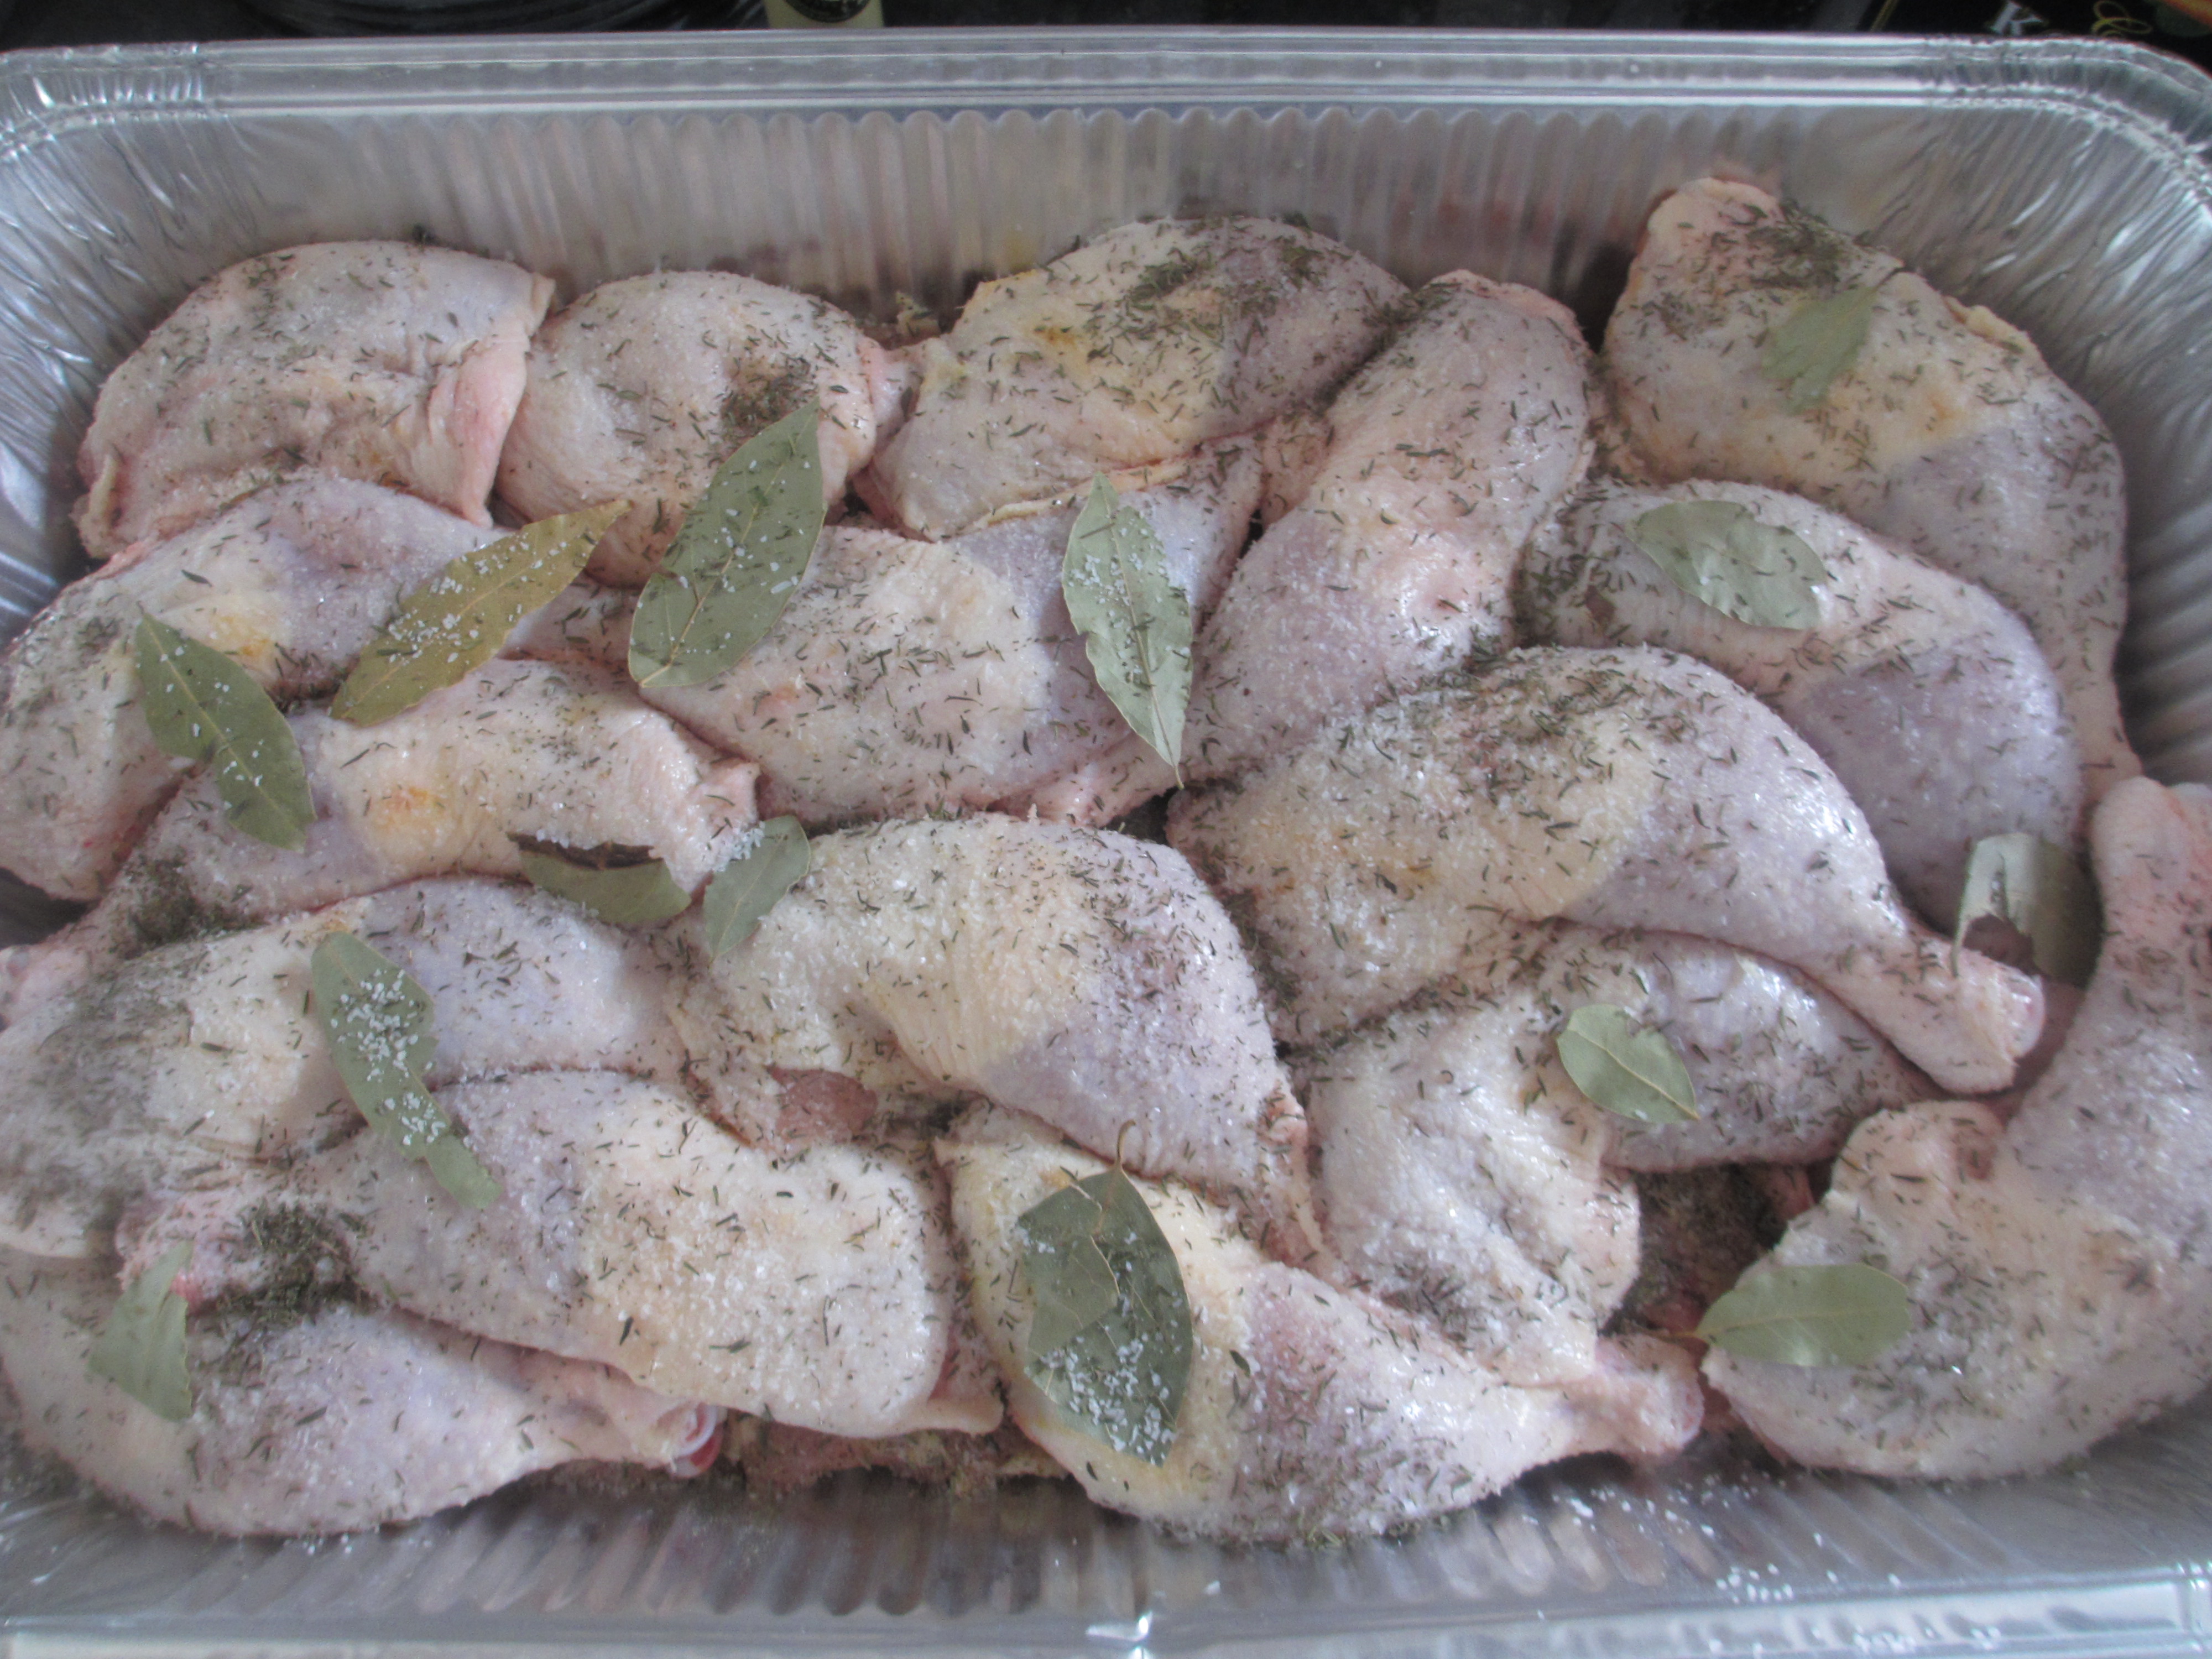 Marinated chicken thighs and drumsticks